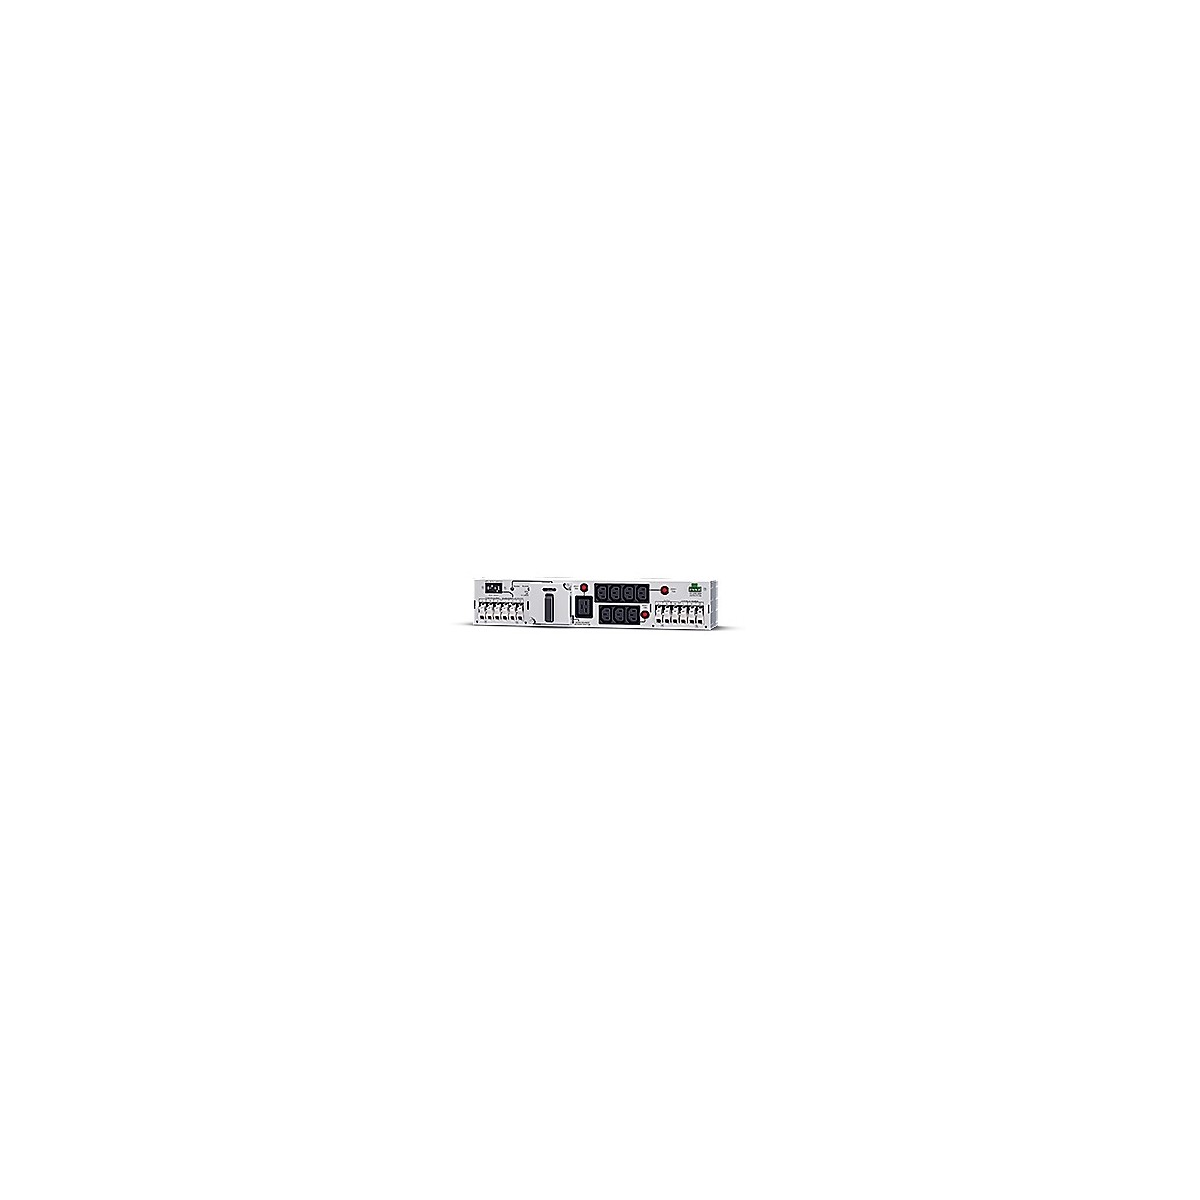 CyberPower Systems CyberPower MBP63AHVHW82U - 2U - Metal - Black - Silver - 8 AC outlet(s) - C13 coupler - C19 coupler - CE - EA